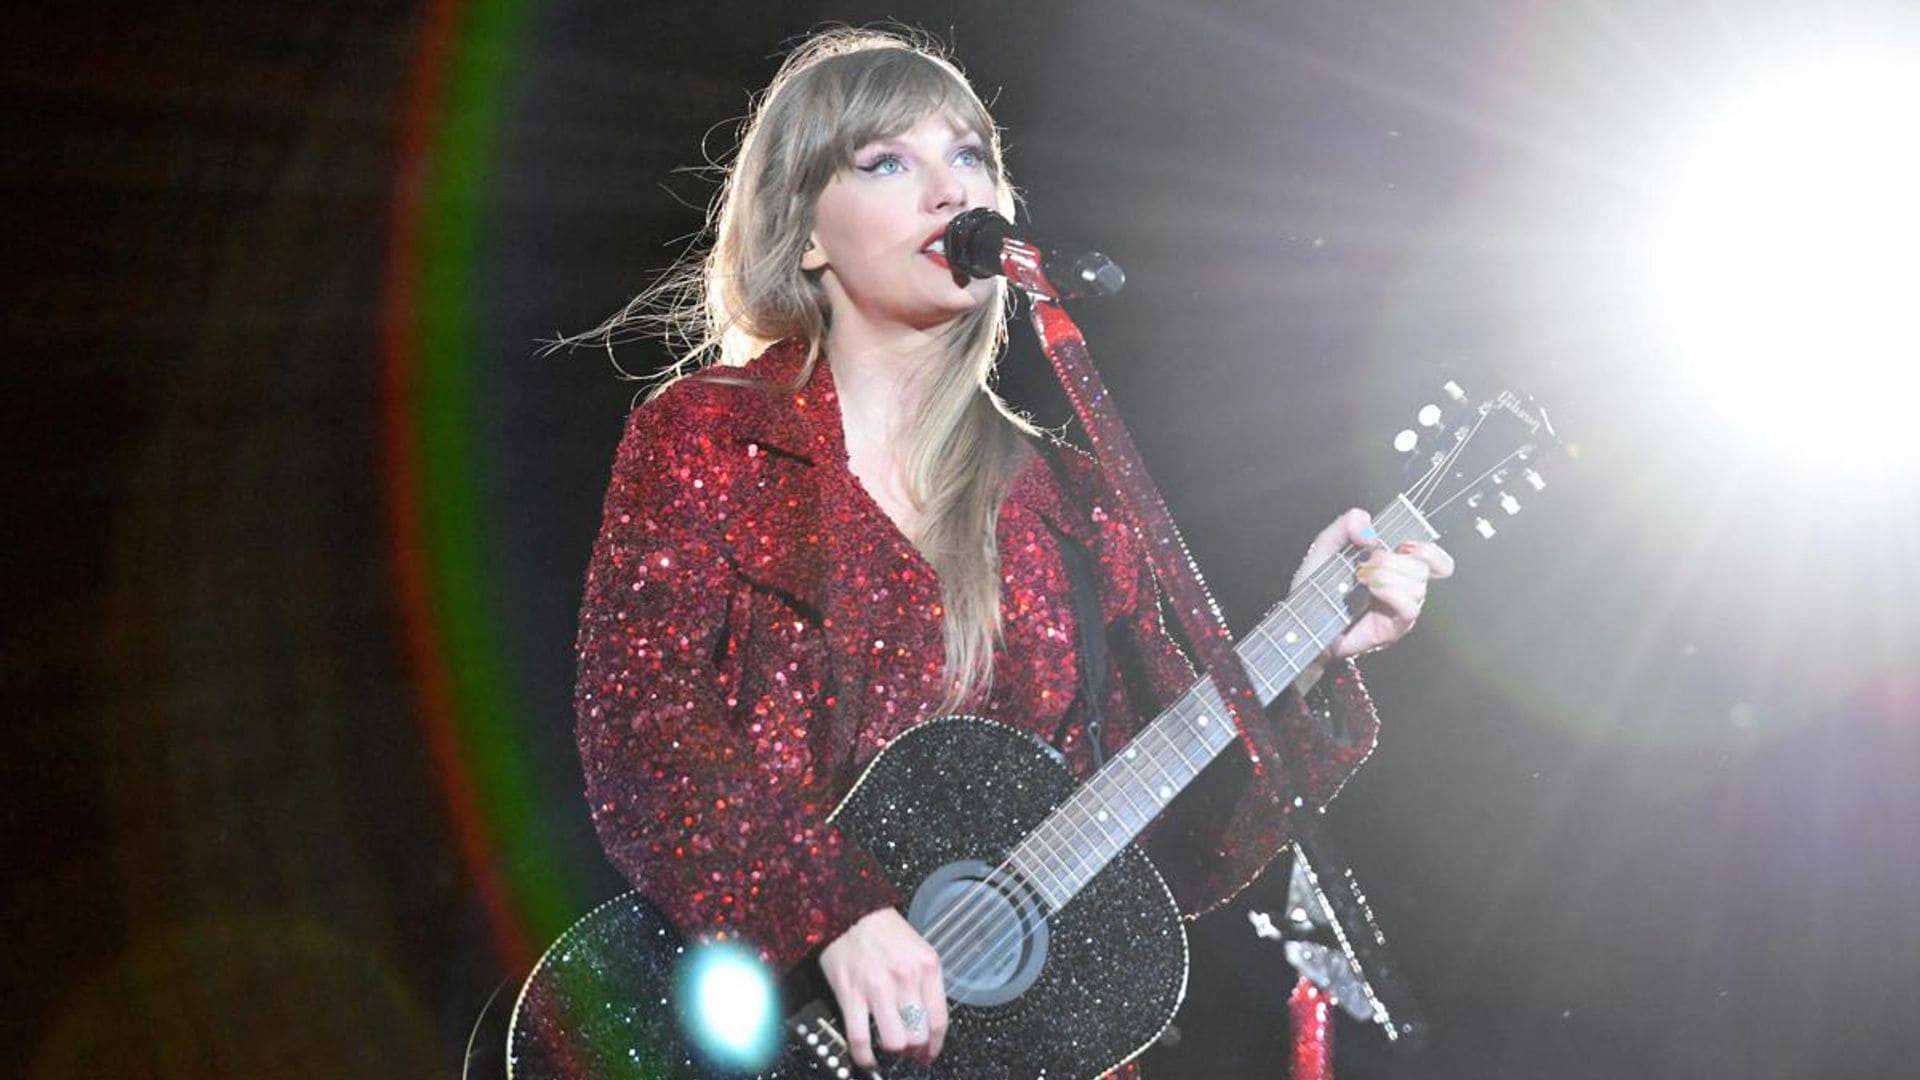 Taylor Swift gave $100k bonuses to bus drivers transporting her equipment